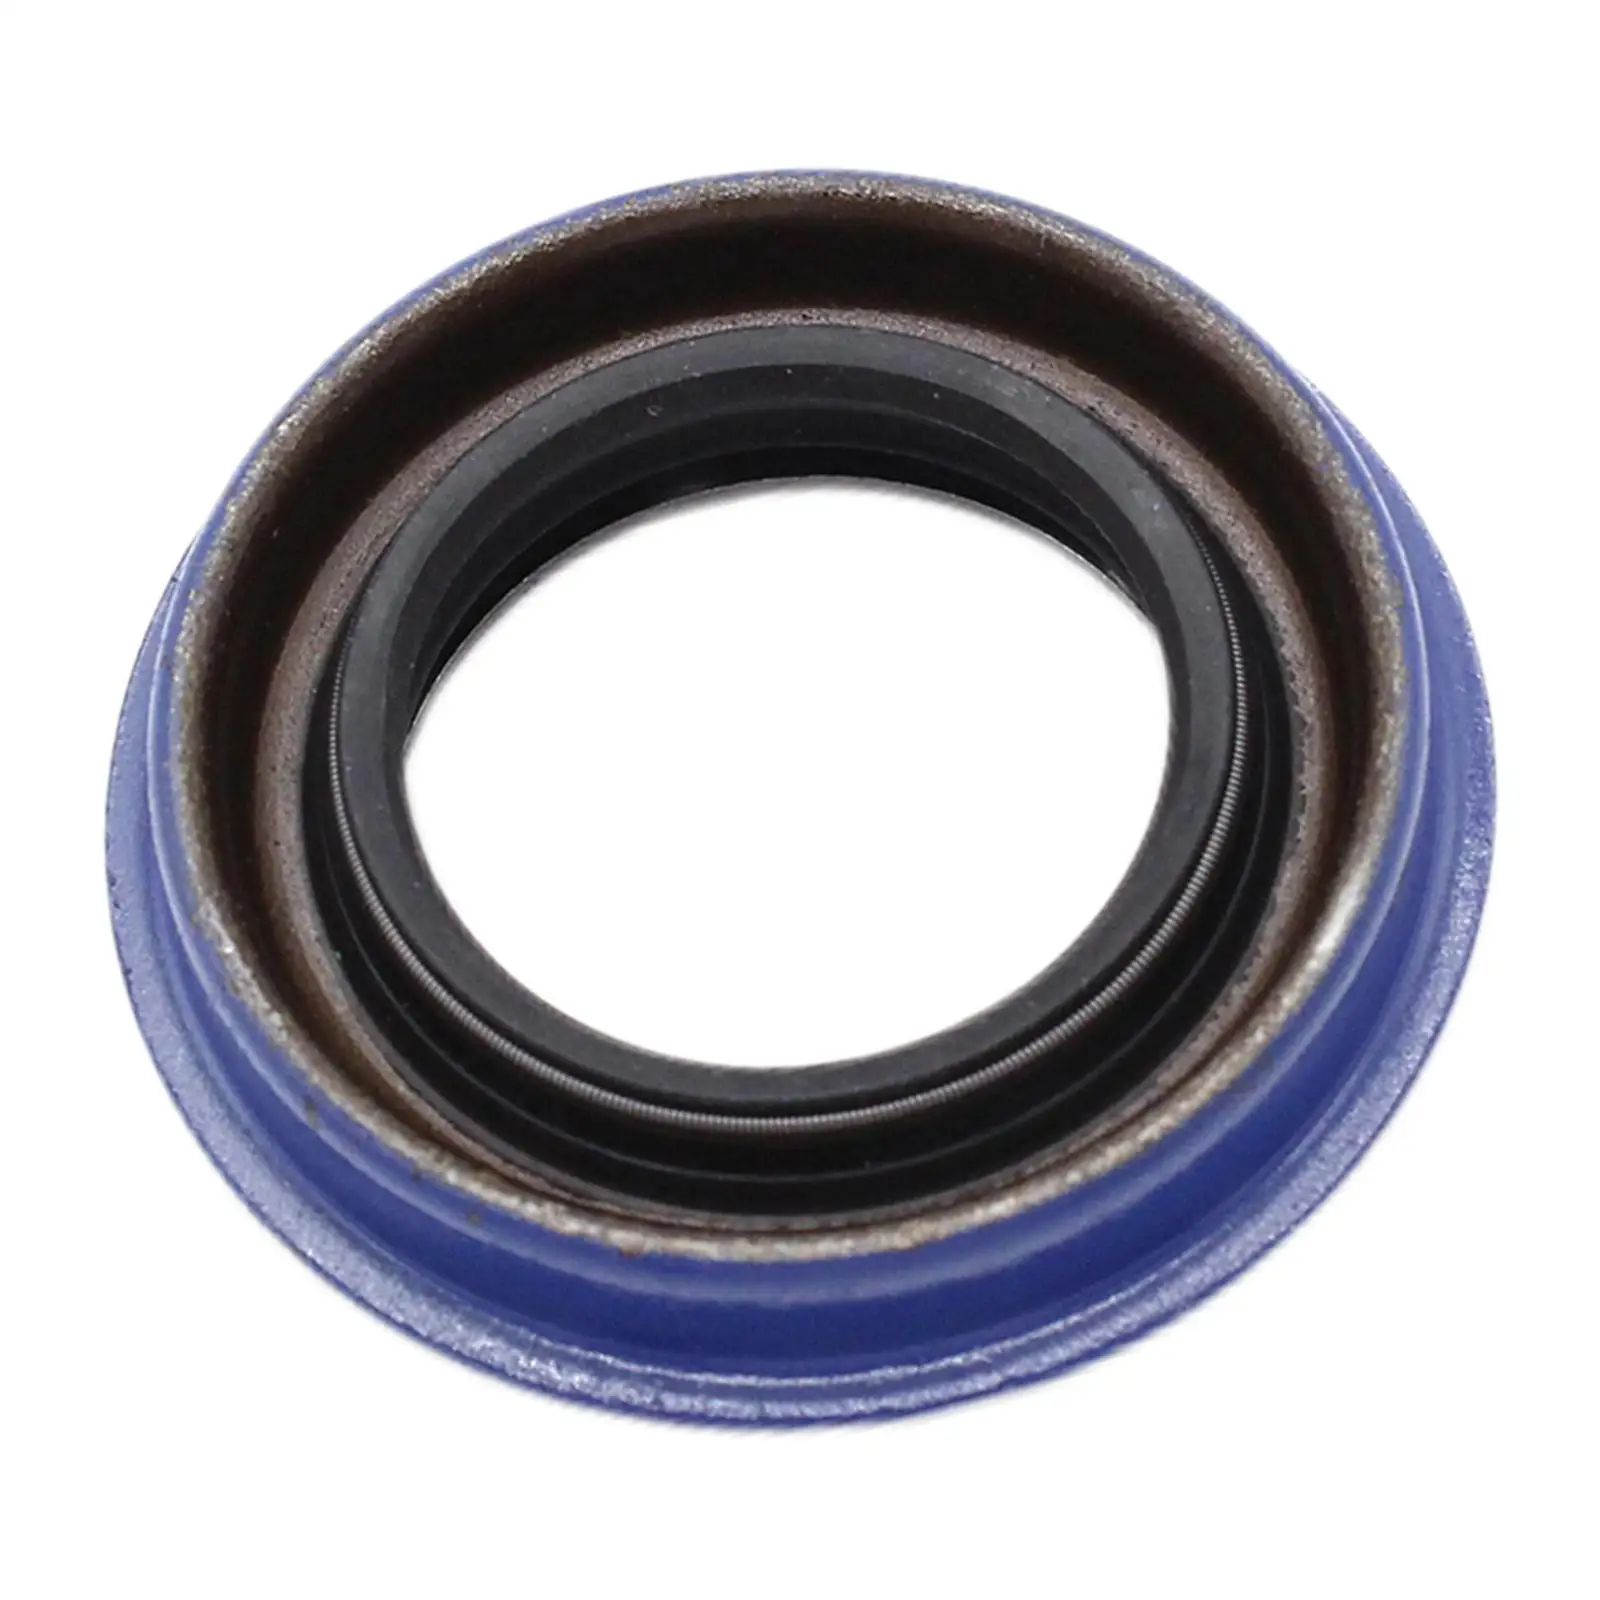 Driveshaft Oil Seal 12755013 Accessories Engine Axle Shaft Seal Fit for Vauxhall for Opel Zafira Mokka x Signum F25